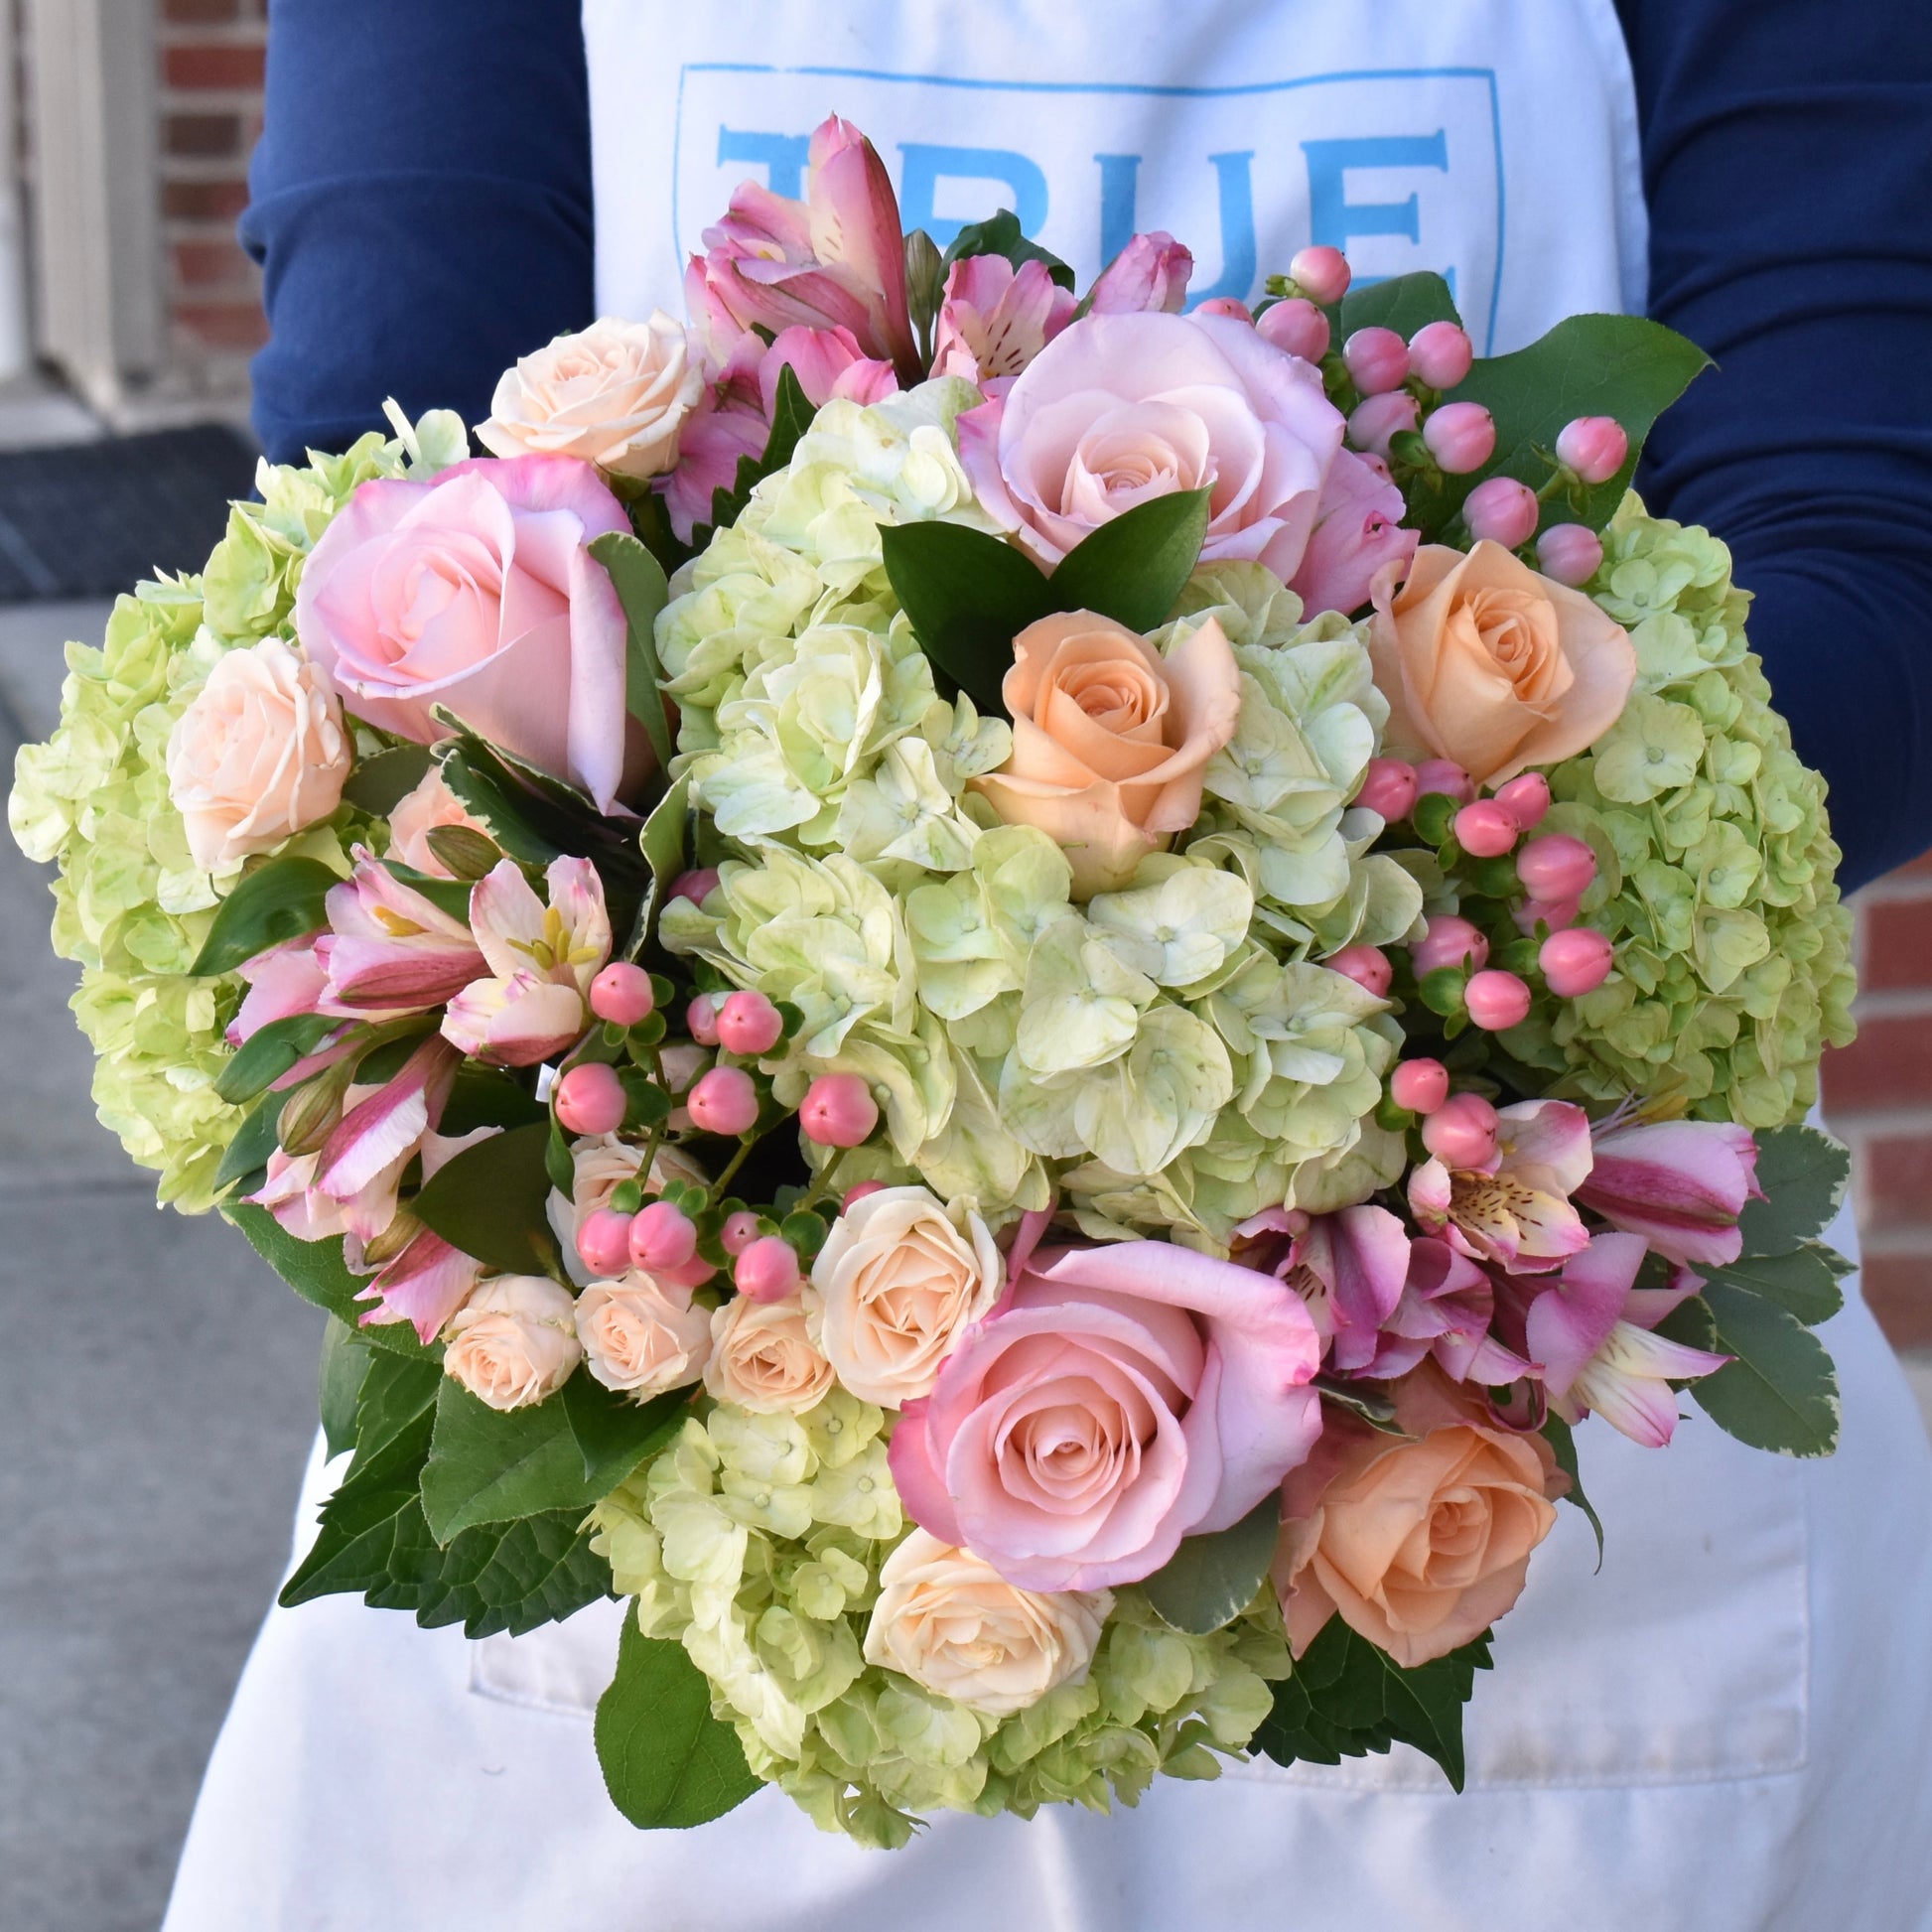 Soft green hydrangea with peach and soft pink flowers arranged in a bouquet